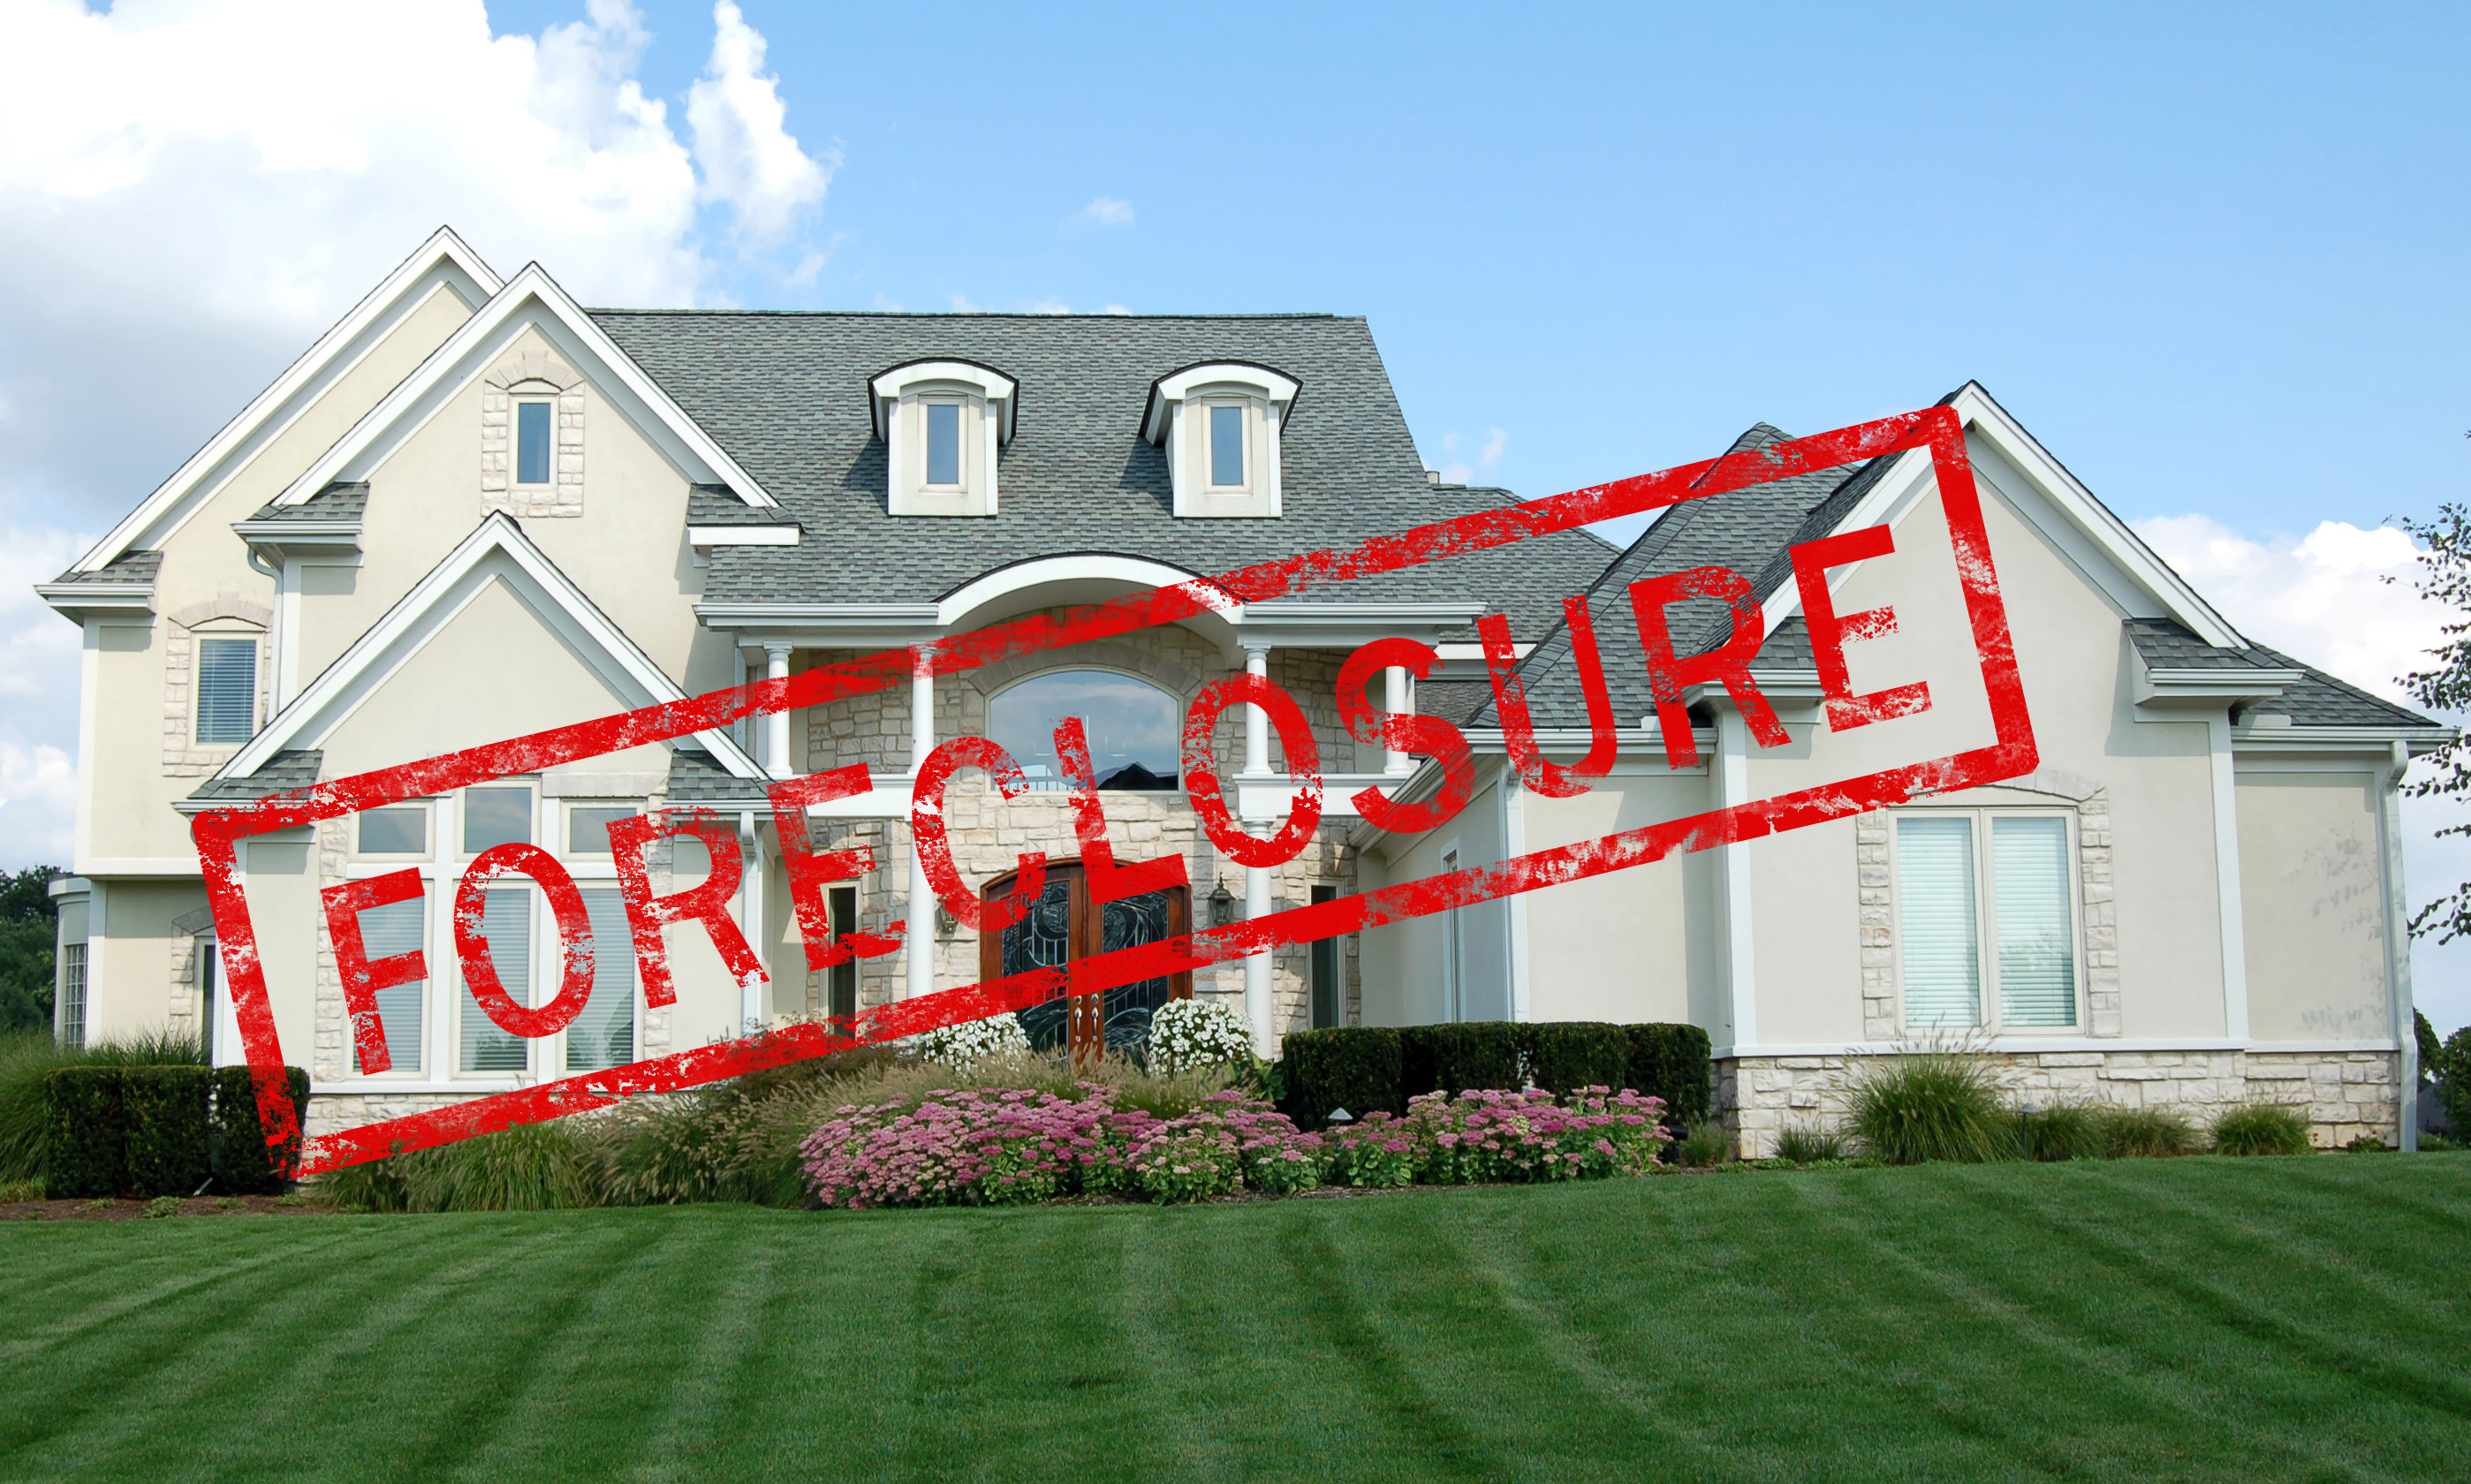 Call Ridge Appraisals and Contracting Services to discuss appraisals of Madison foreclosures